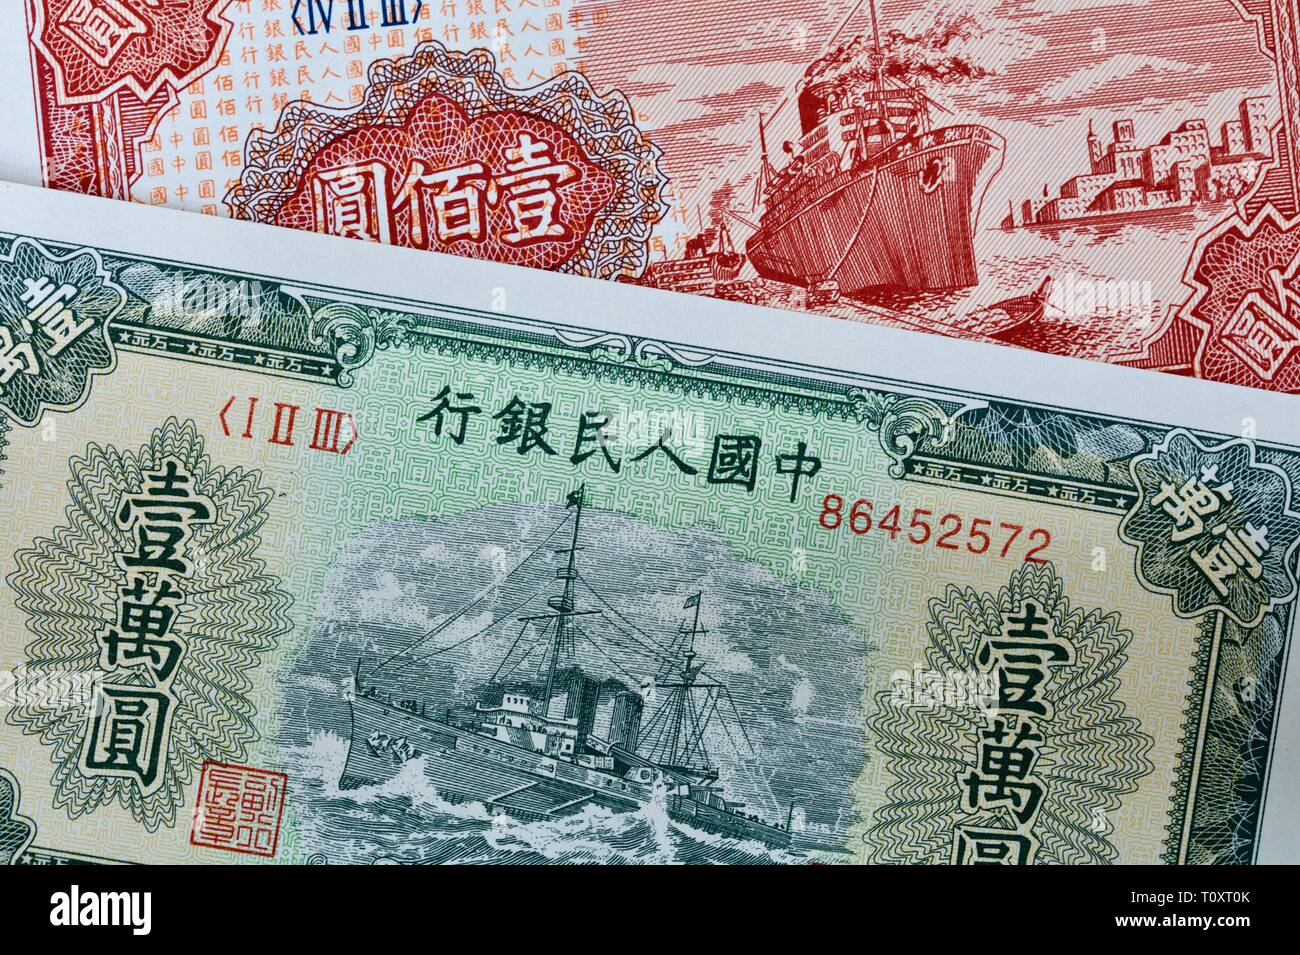 Banknotes from the 1st series of the renminbi also called 'Old Currency' introduced during the Chinese Civil War Stock Photo